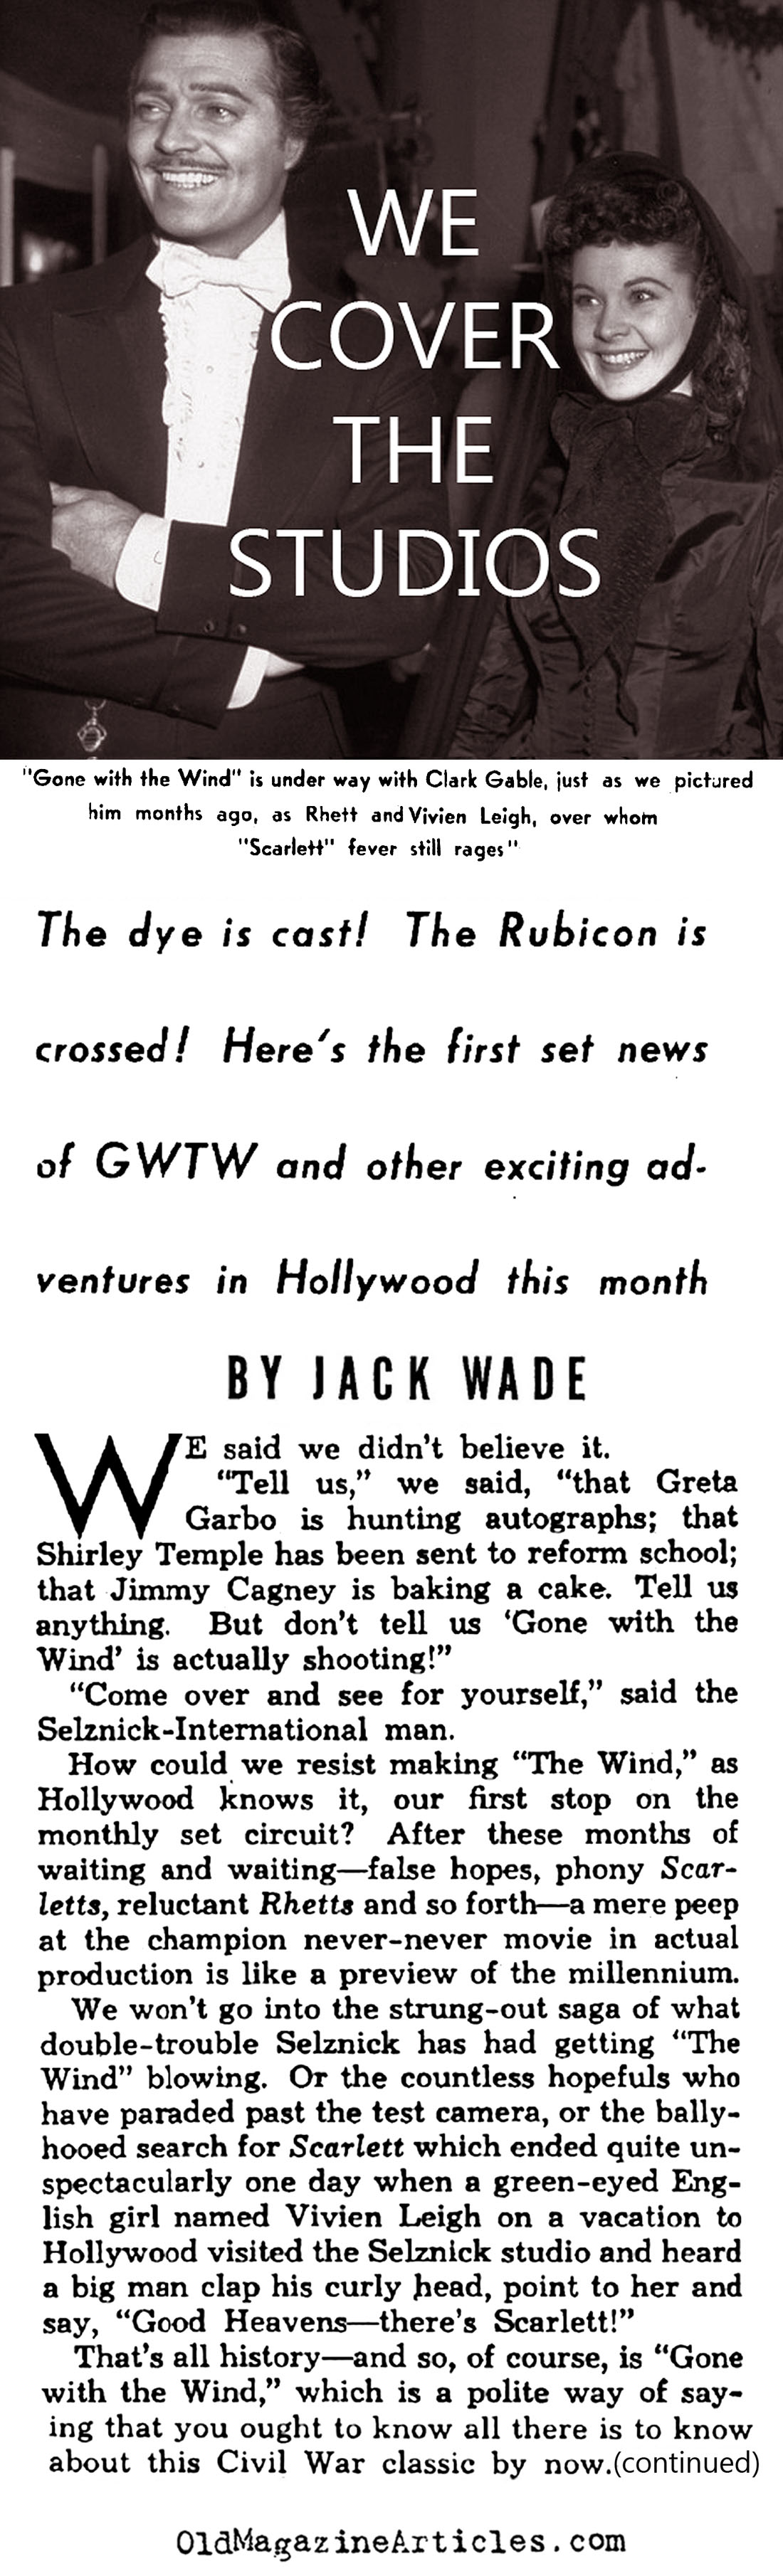 Gone with Wind Begins Shooting (Photoplay Magazine, 1939)